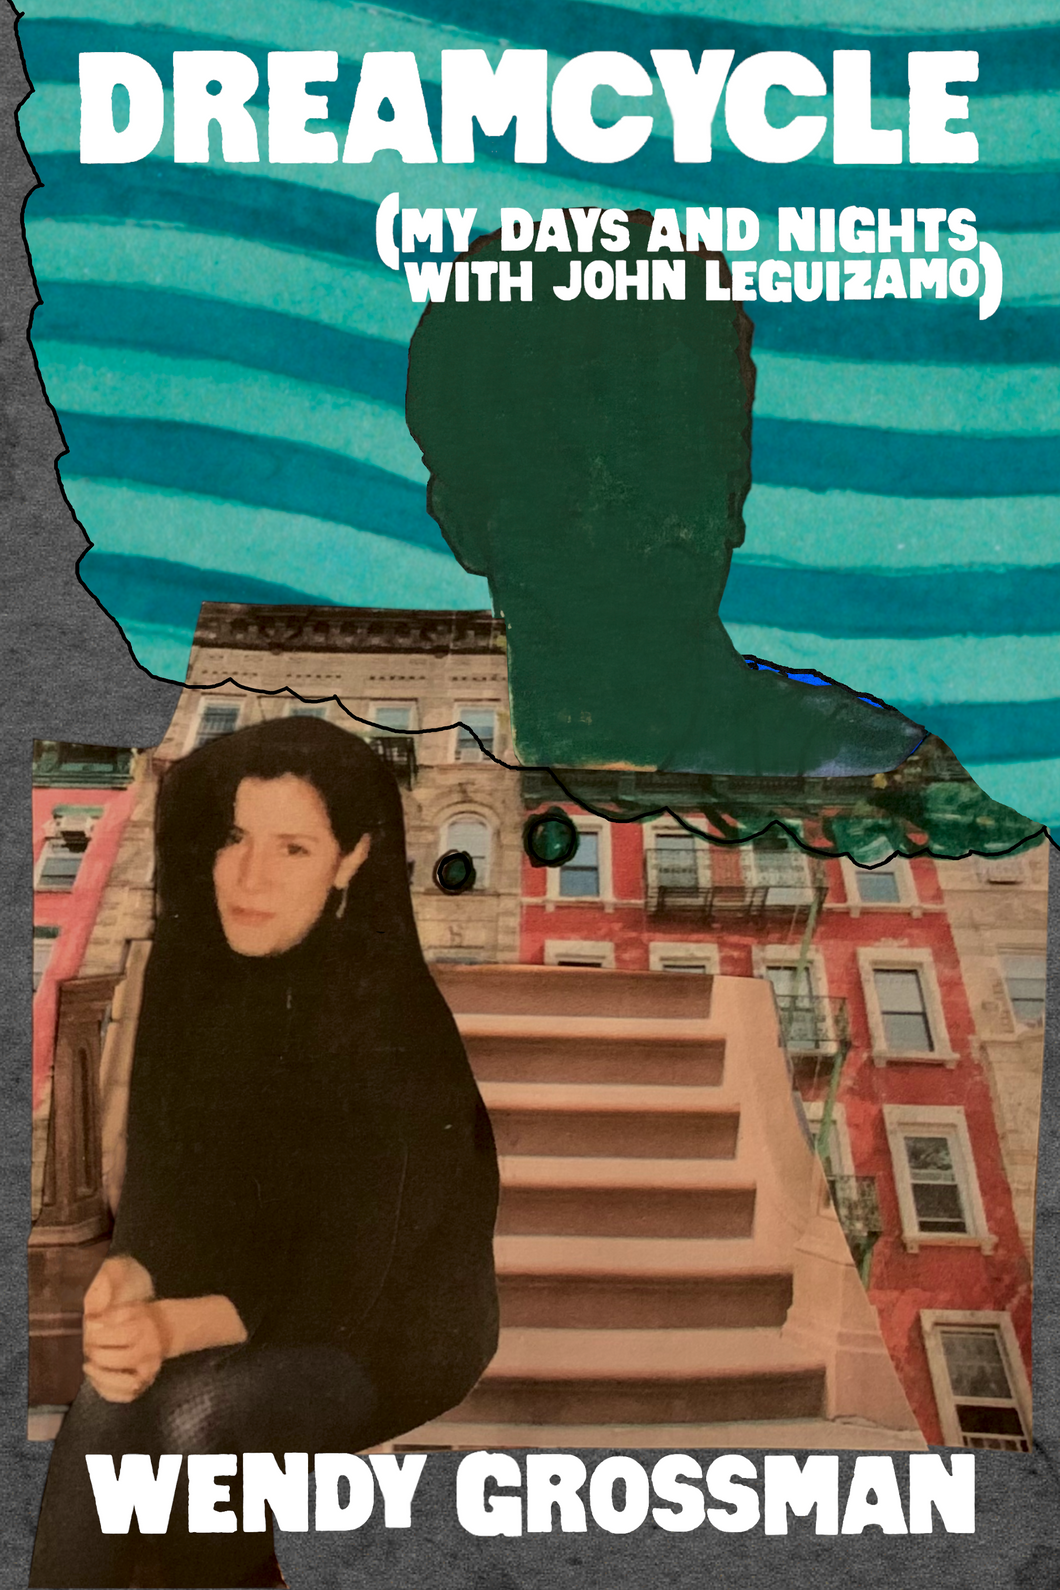 Dreamcycle: (my days and nights with John Leguizamo), by Wendy Grossman-Print Books-Bottlecap Press